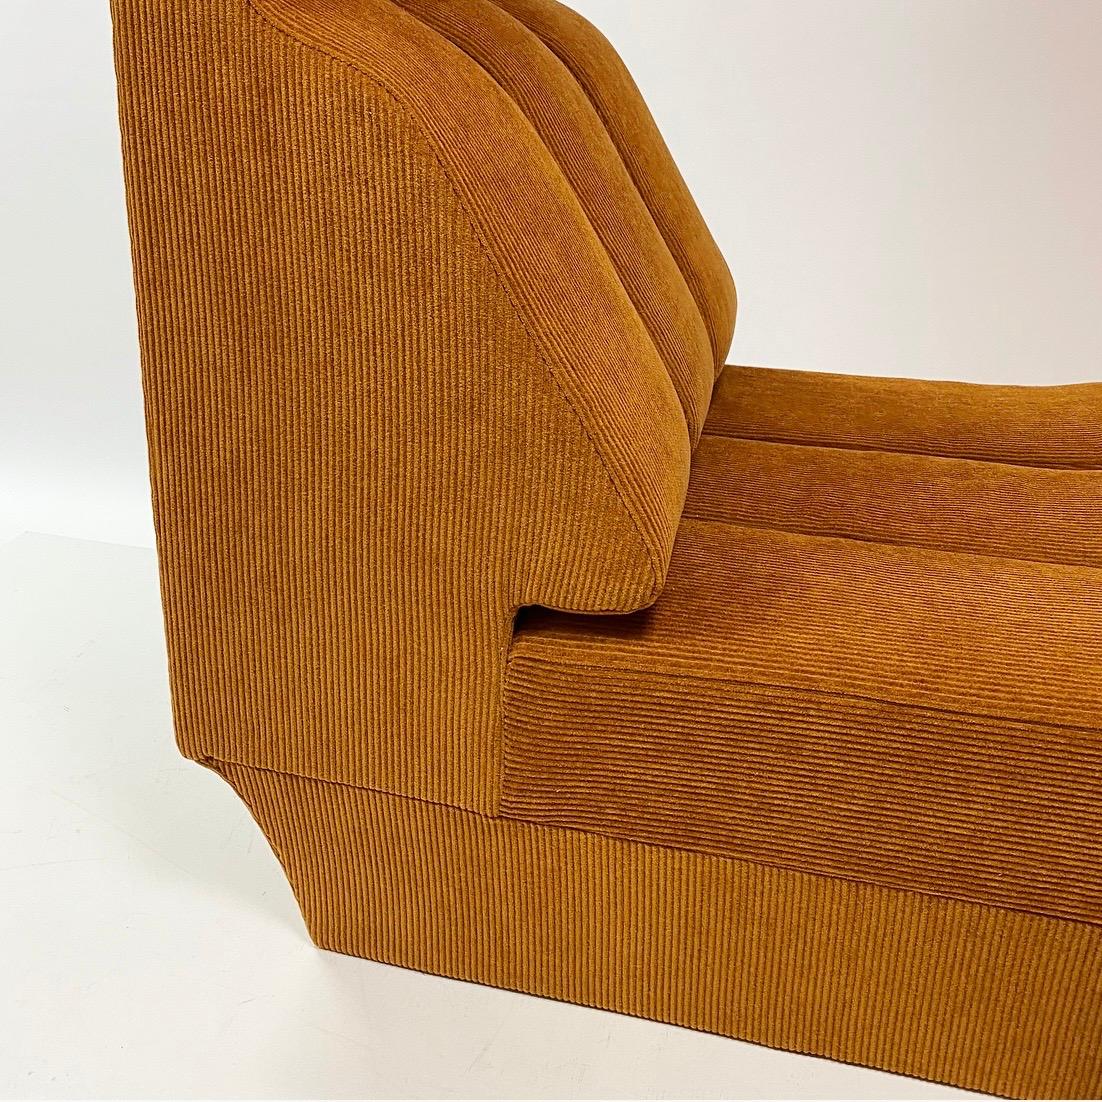 Interlübke Highback Space Age Seat with New Upholstery, Germany, 1970 For Sale 4